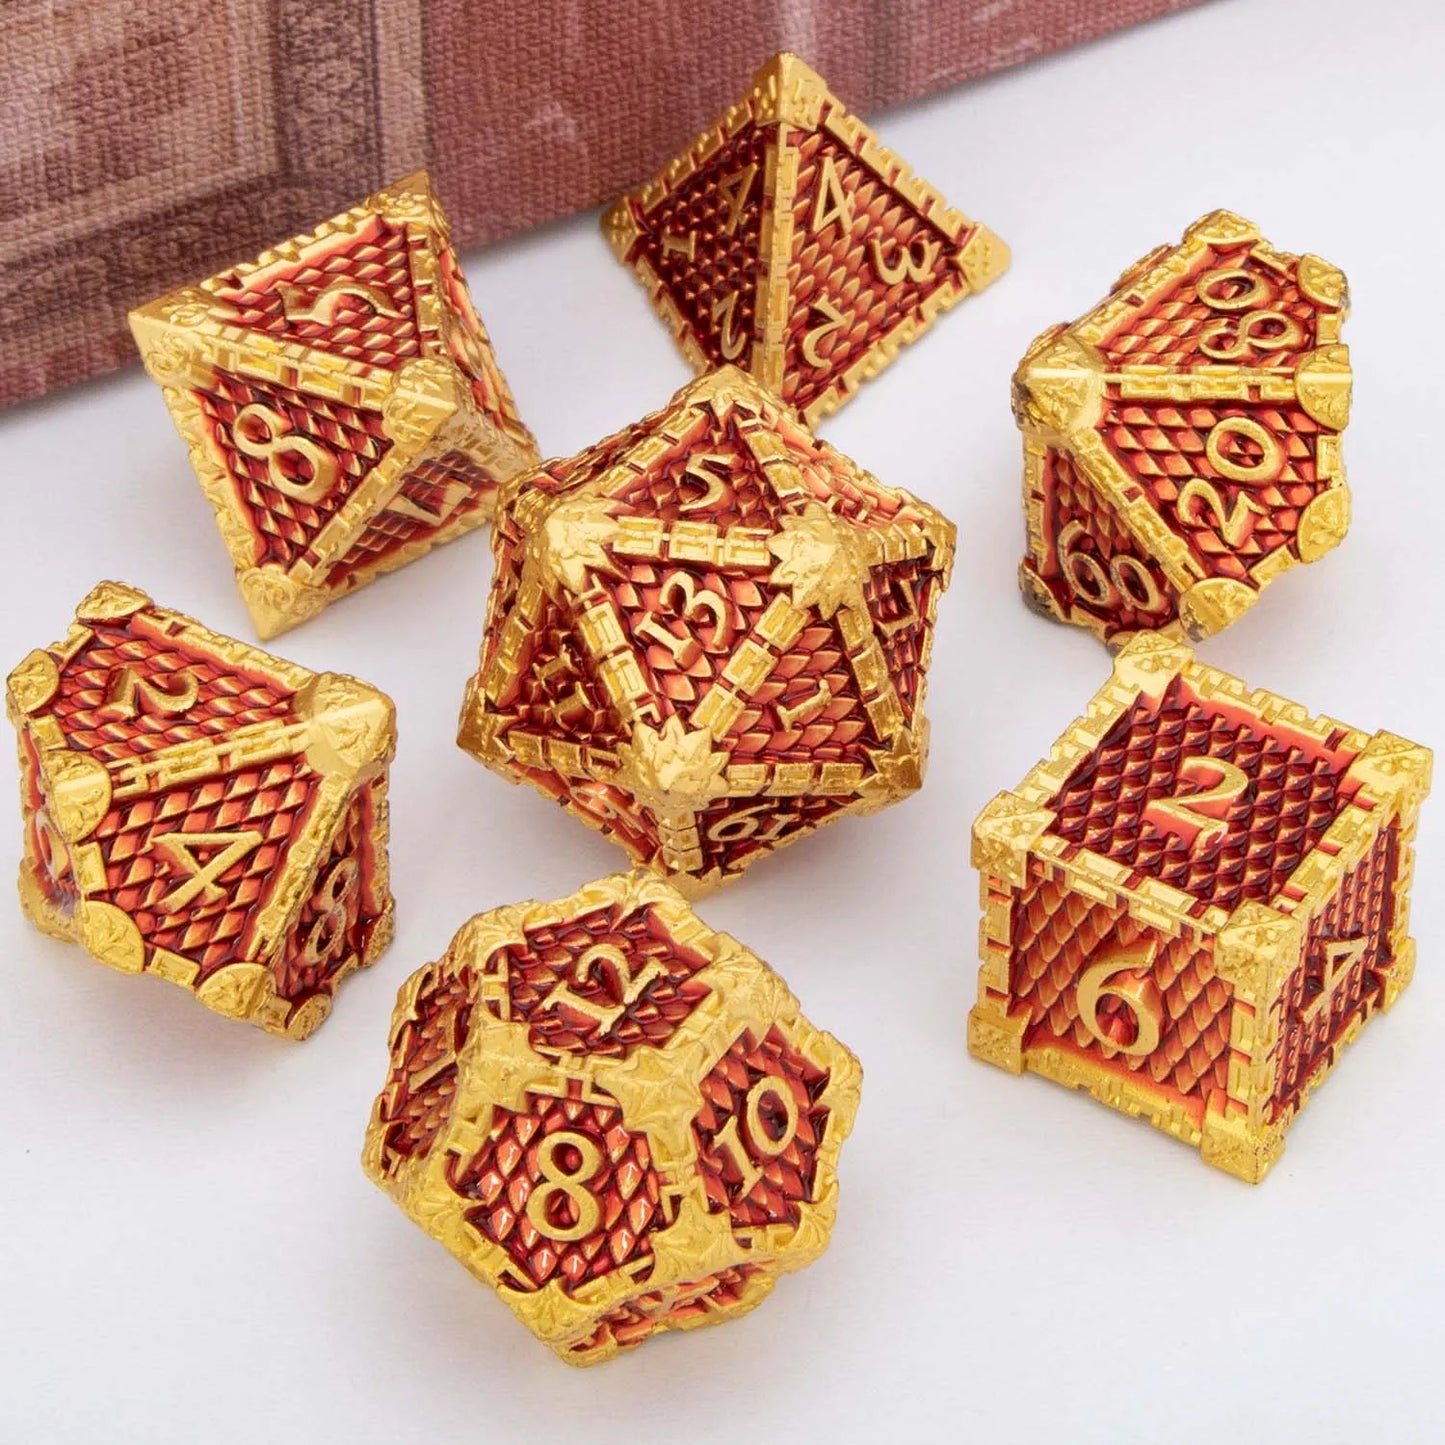 DND Metal Dice Set Dragon Scale Blood D&D Dice Dungeon and Dragon Role Playing Games Polyhedral Dice RPG D and D Dice Golden Red